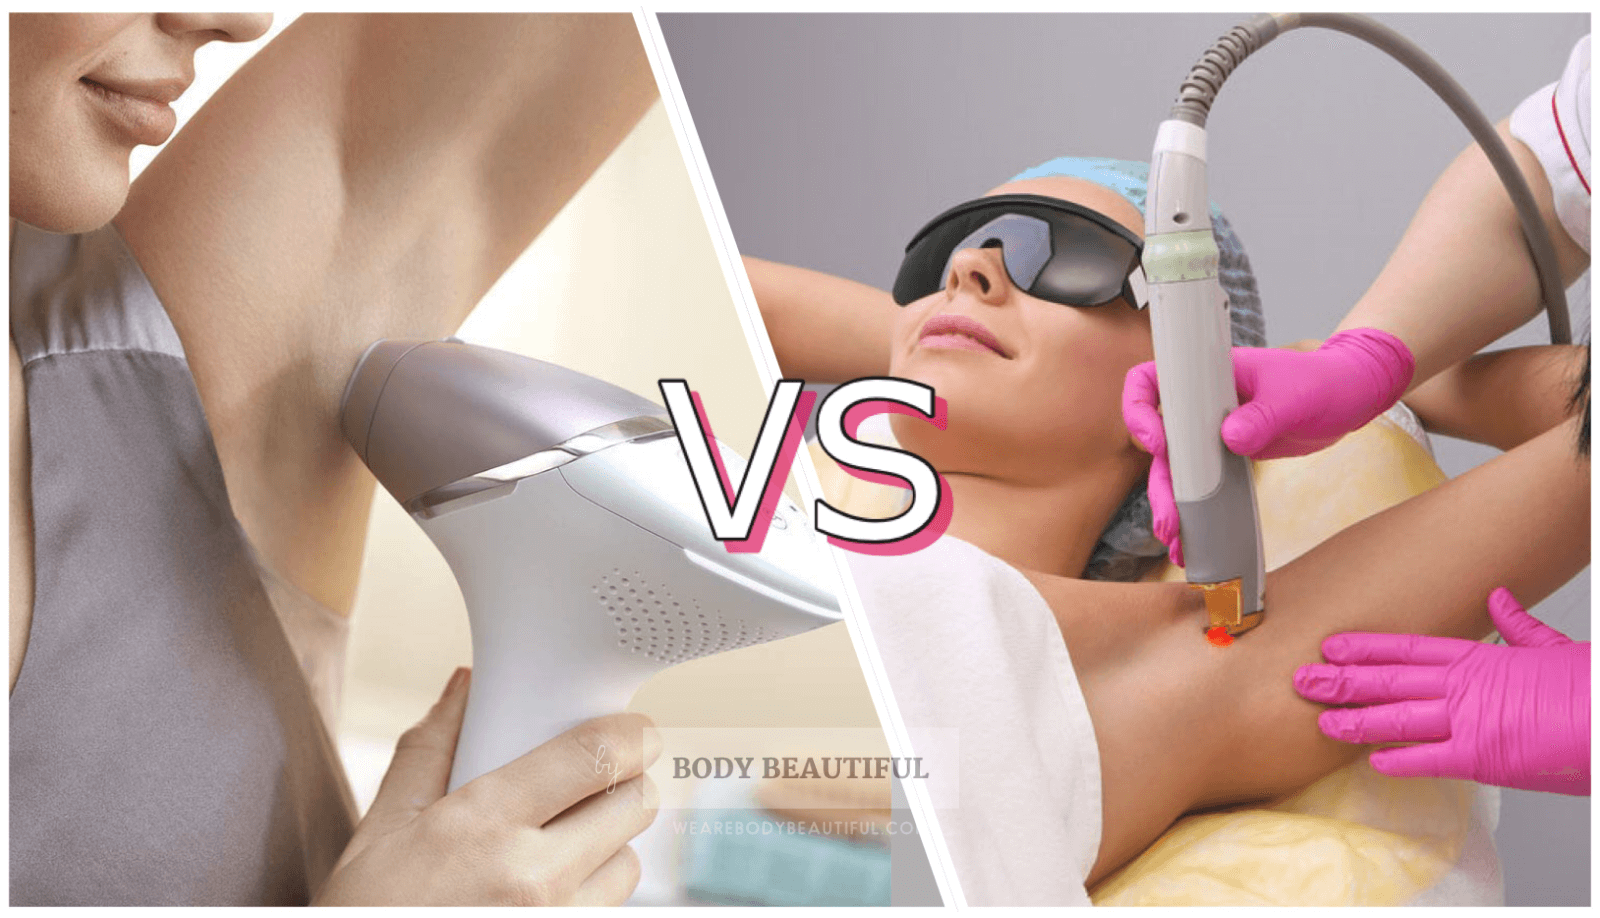 At-home laser & IPL hair removal vs Professional: which is best?